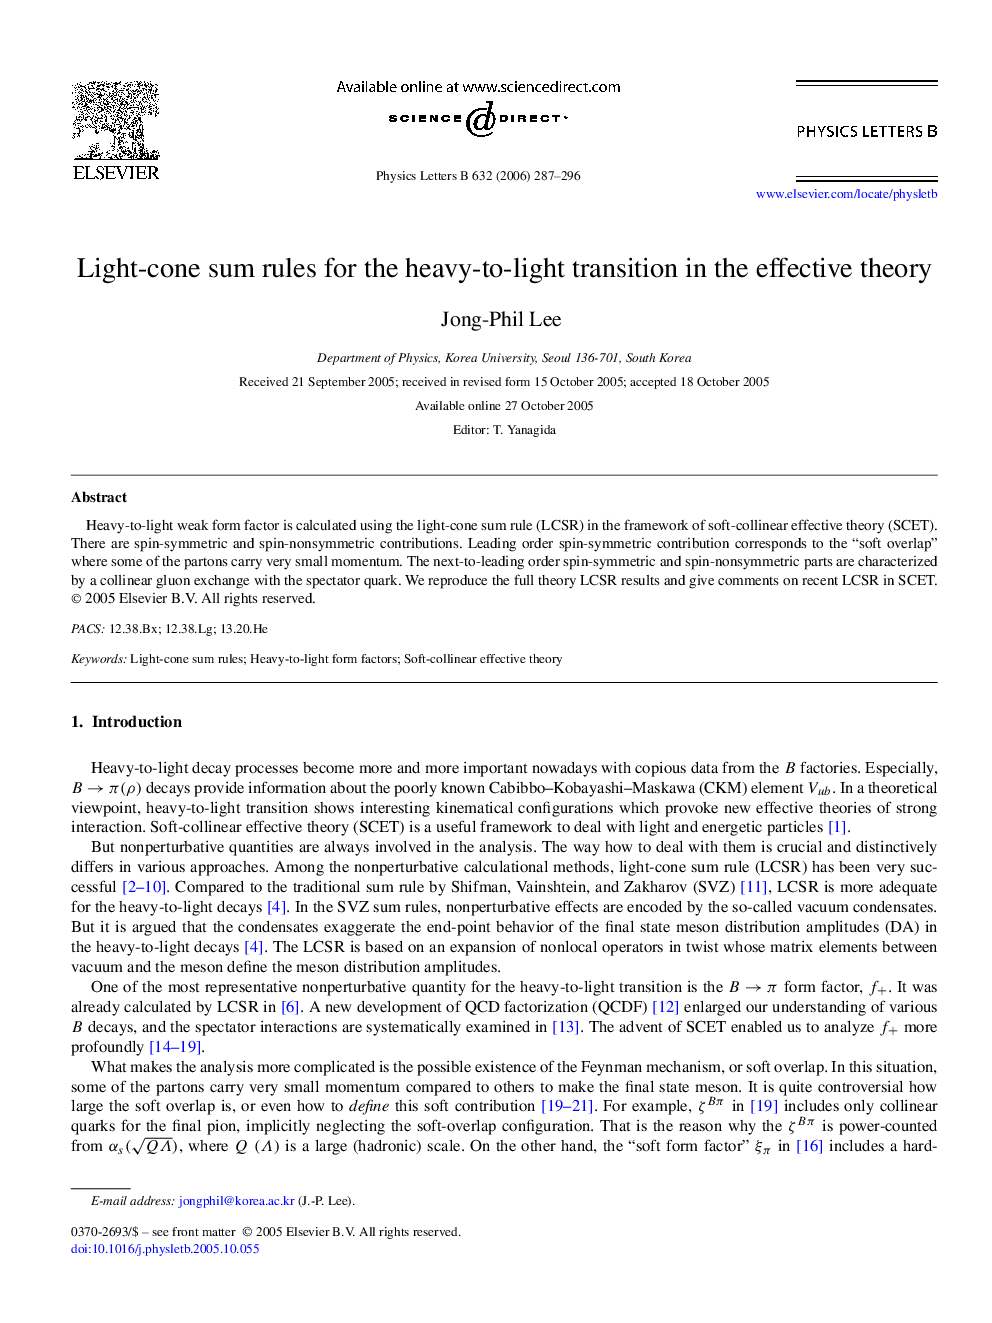 Light-cone sum rules for the heavy-to-light transition in the effective theory